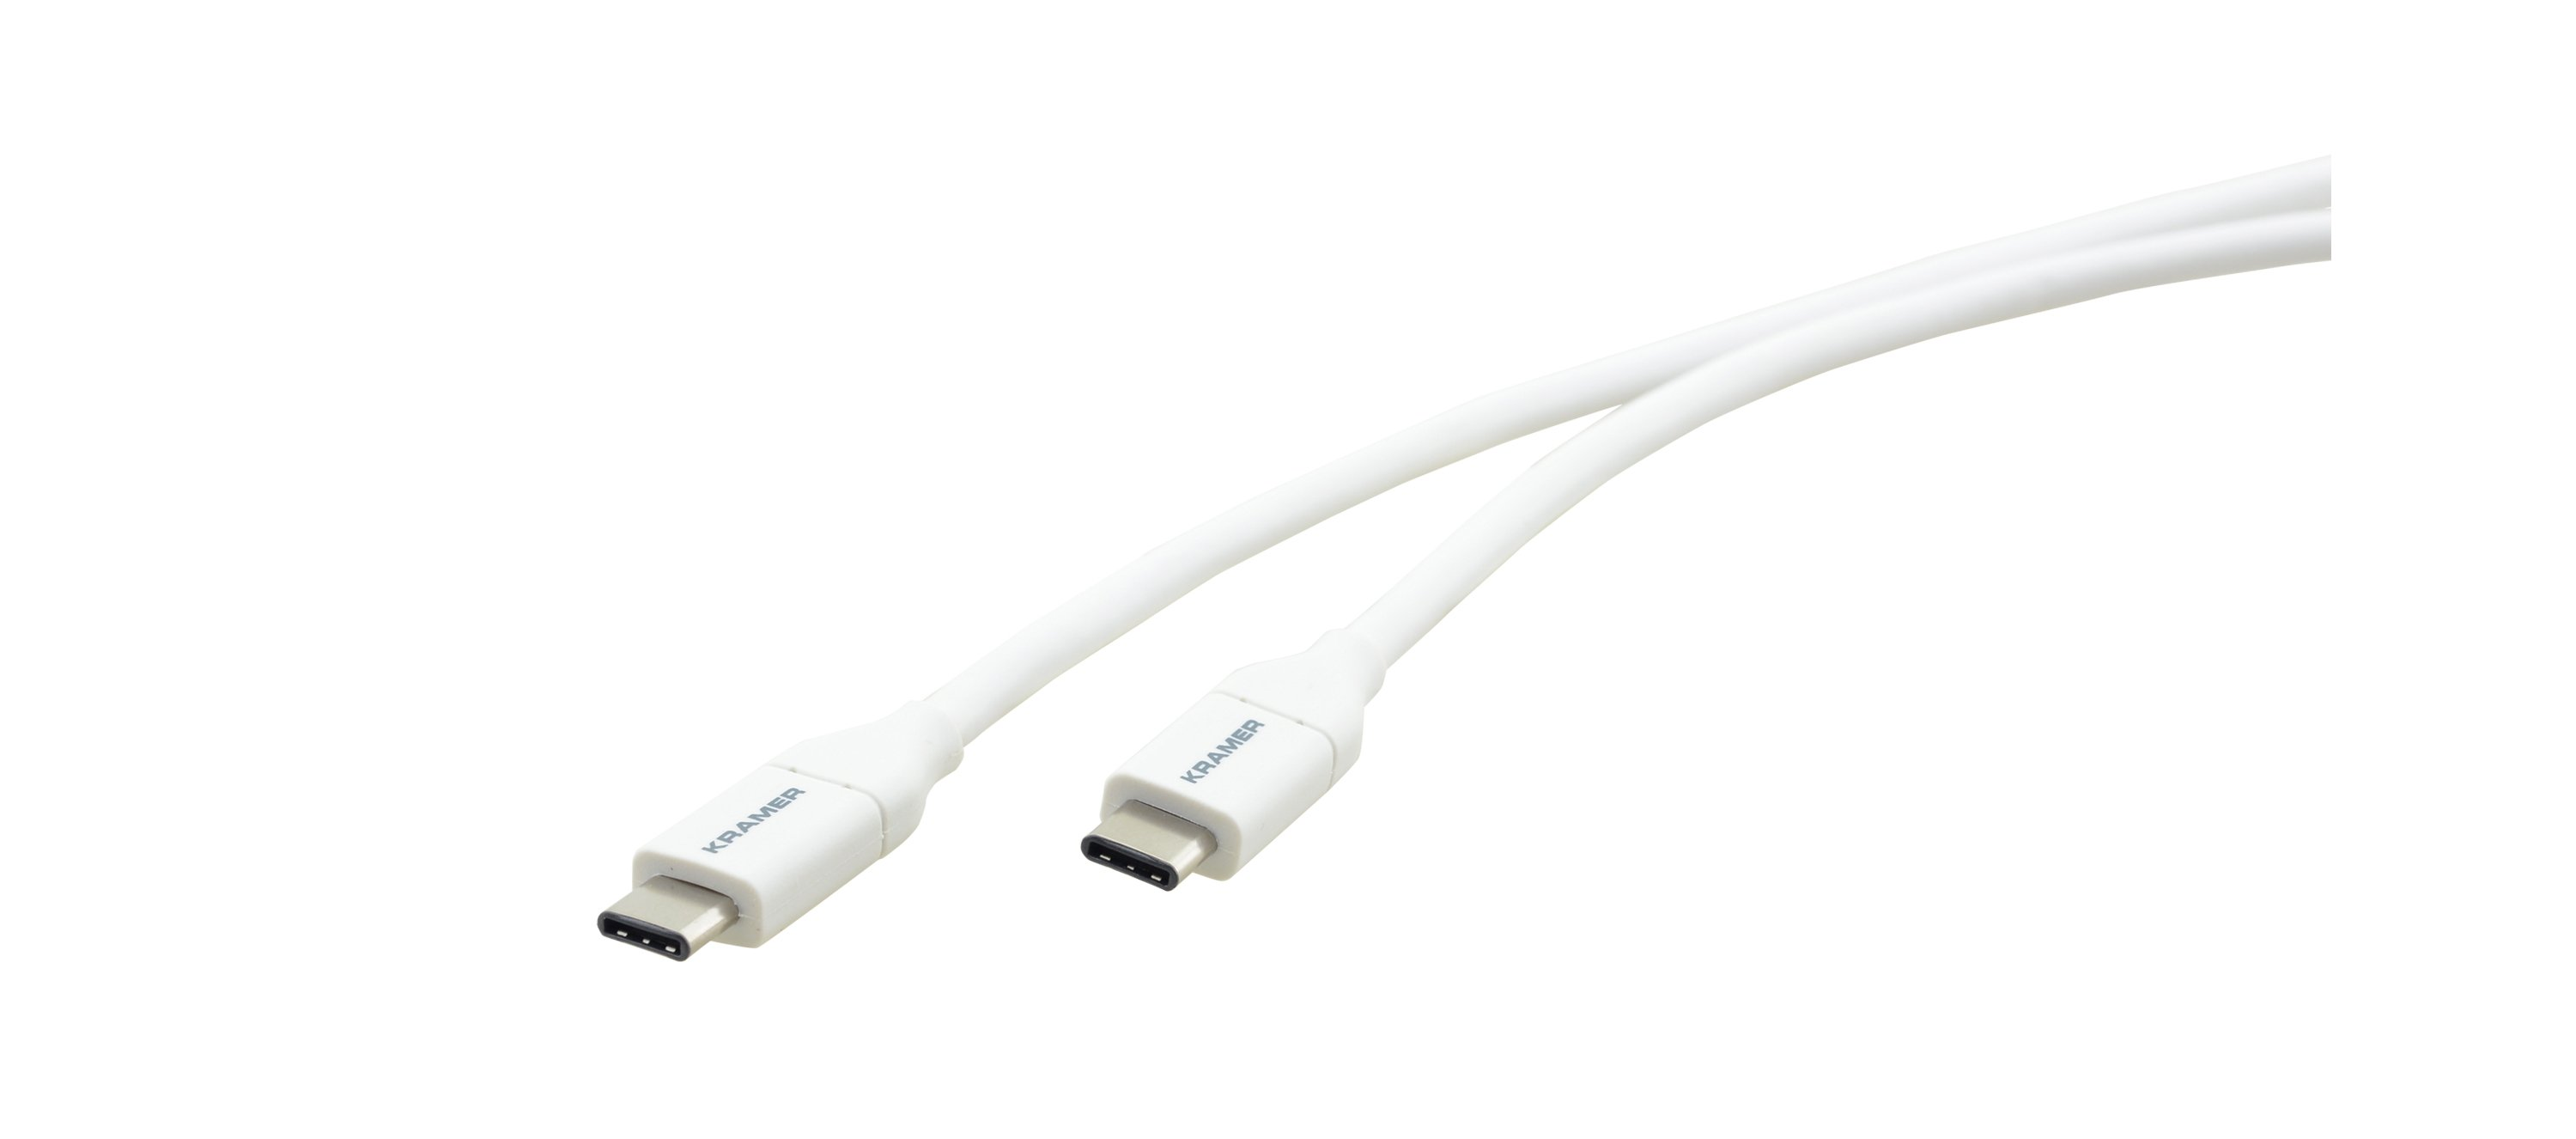 C-USB/CC-6 USB 2.0 C(M) to C(M) Cable-6ft